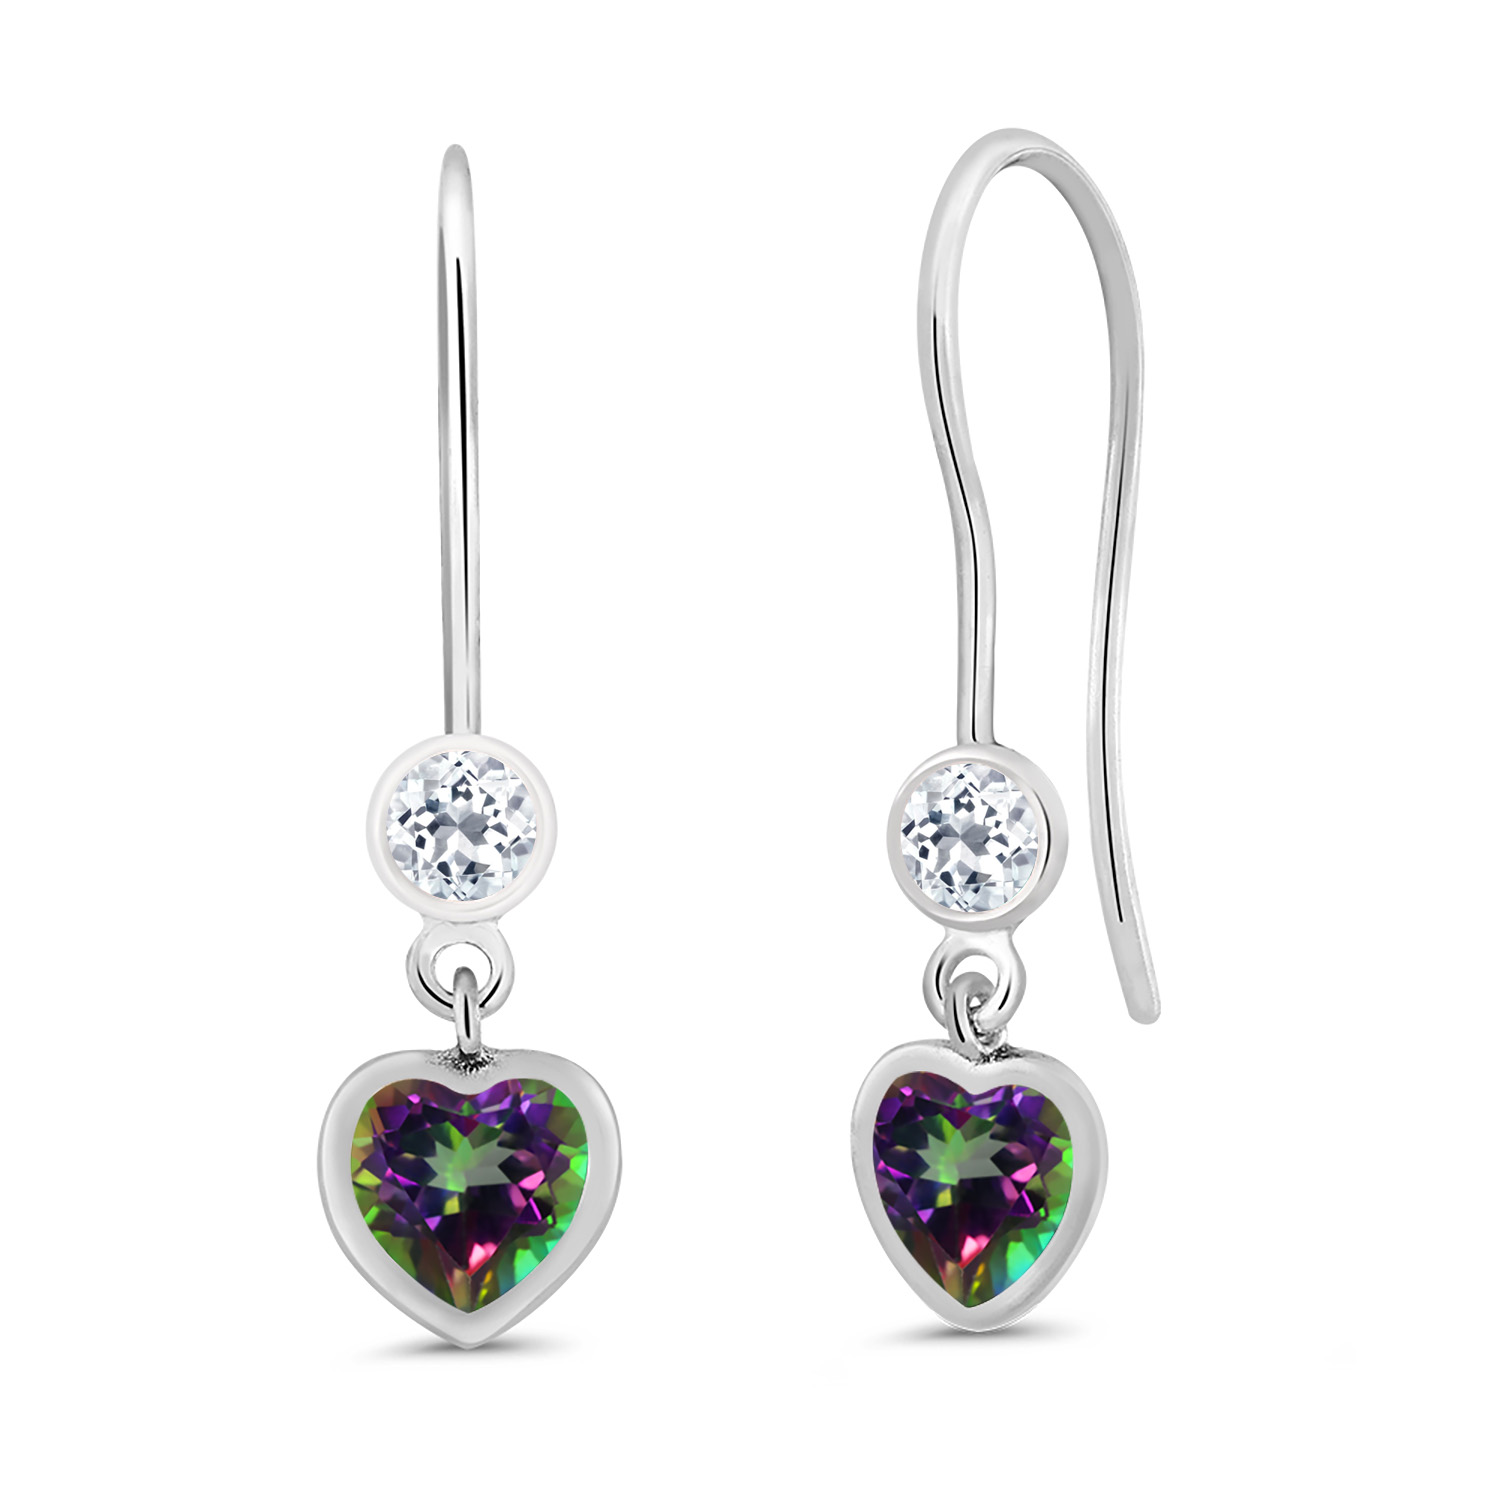 Gem Stone King 925 Sterling Silver Green Mystic Topaz and White Topaz French Wire Dangle Hook Earrings For Women (1.48 Cttw, 5MM Heart Shape)